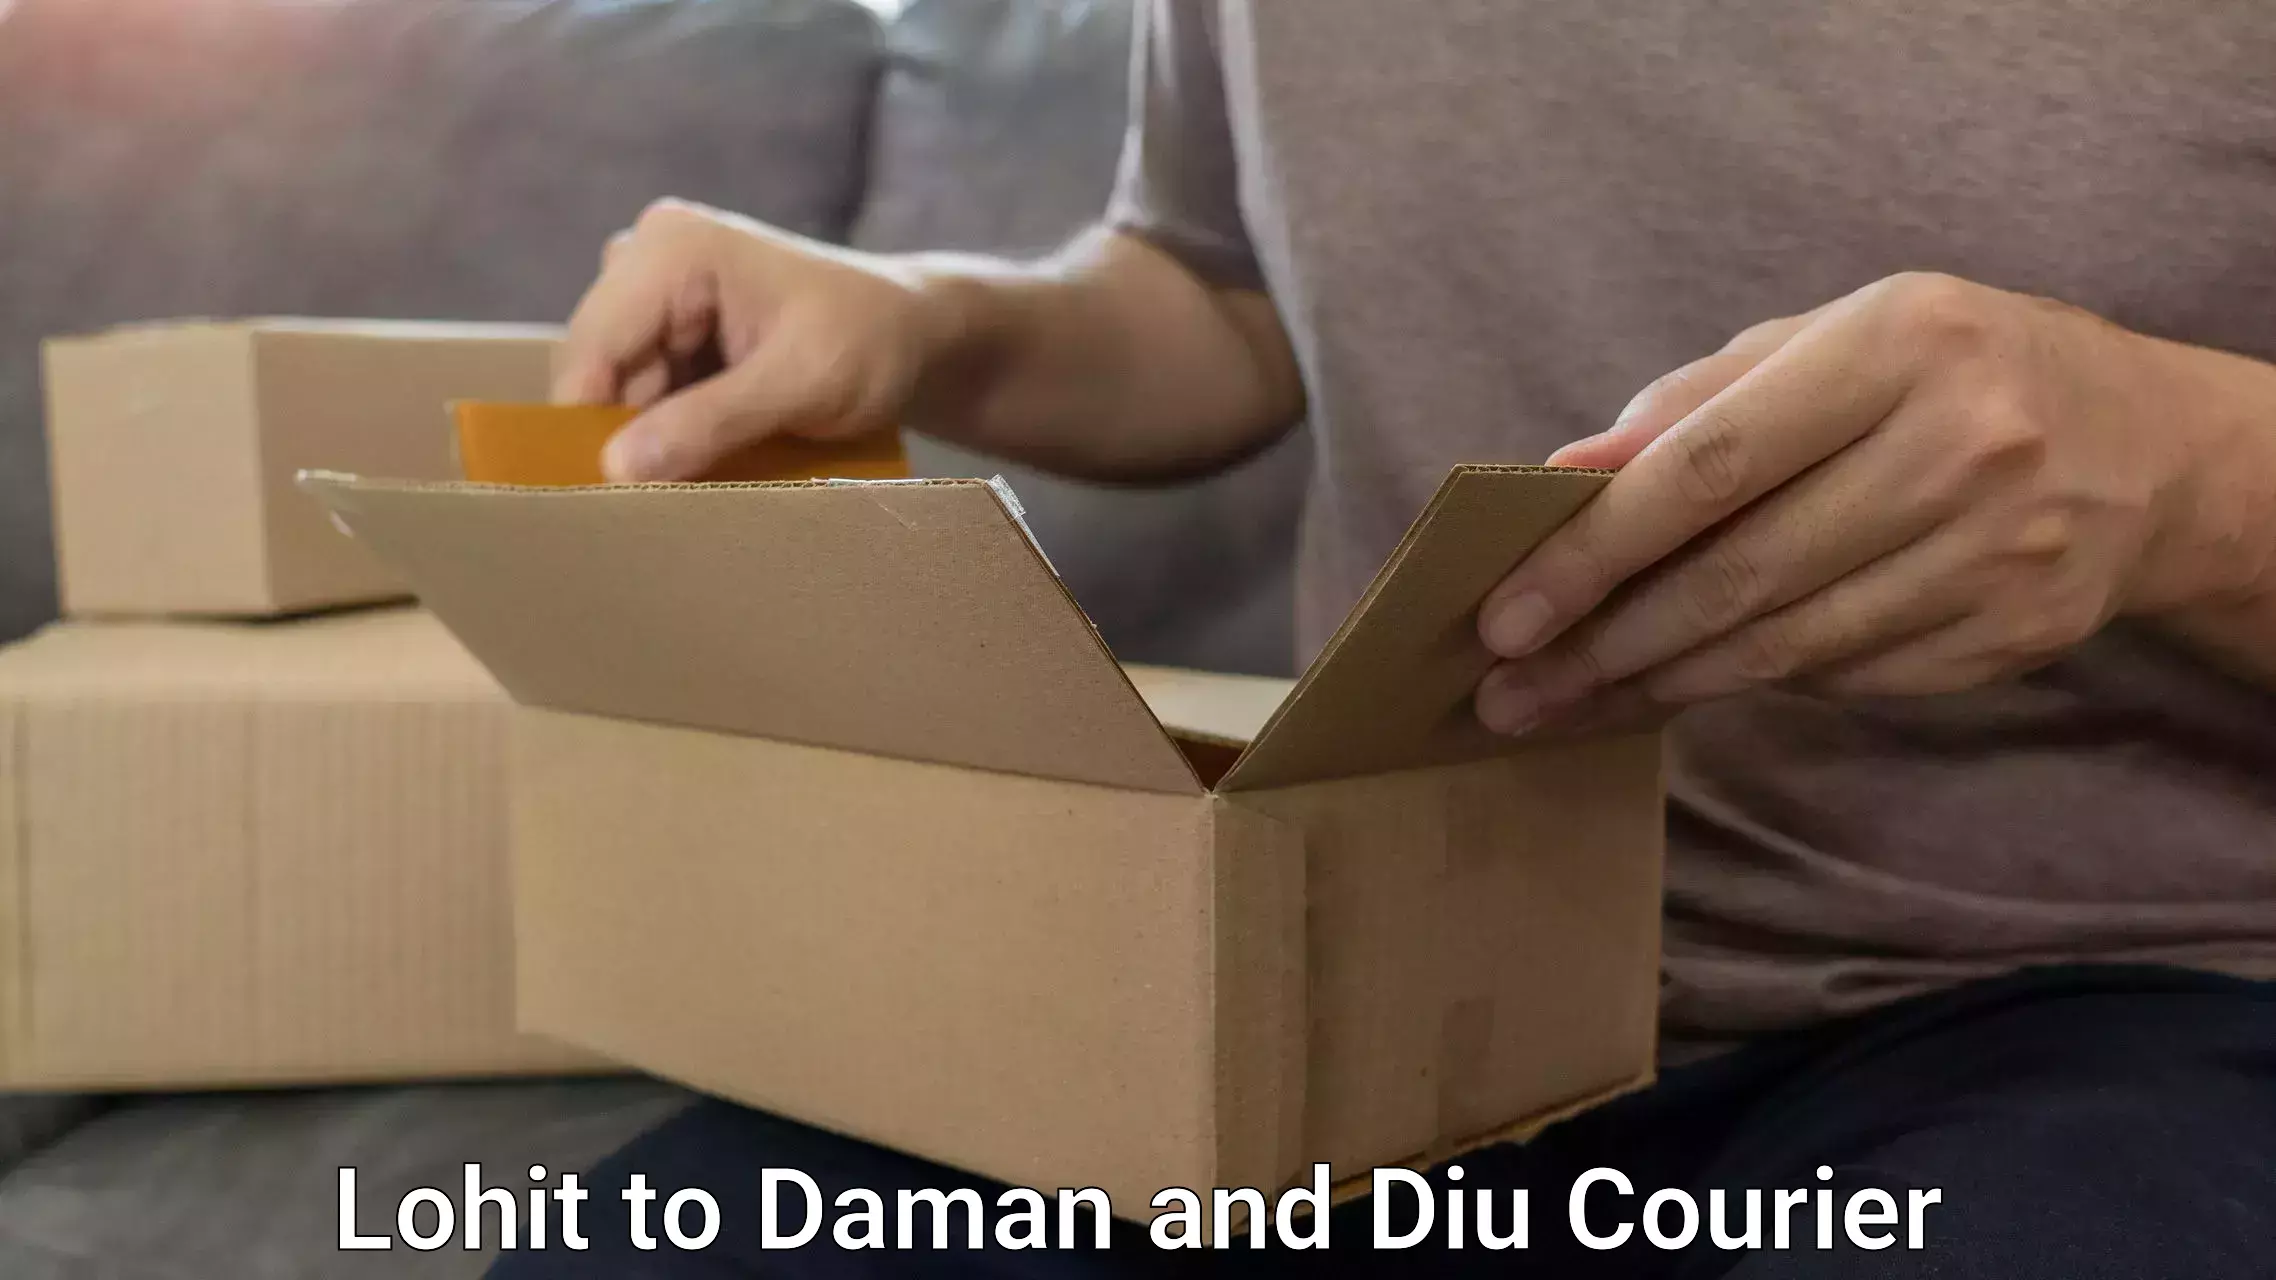 Hassle-free luggage shipping Lohit to Daman and Diu